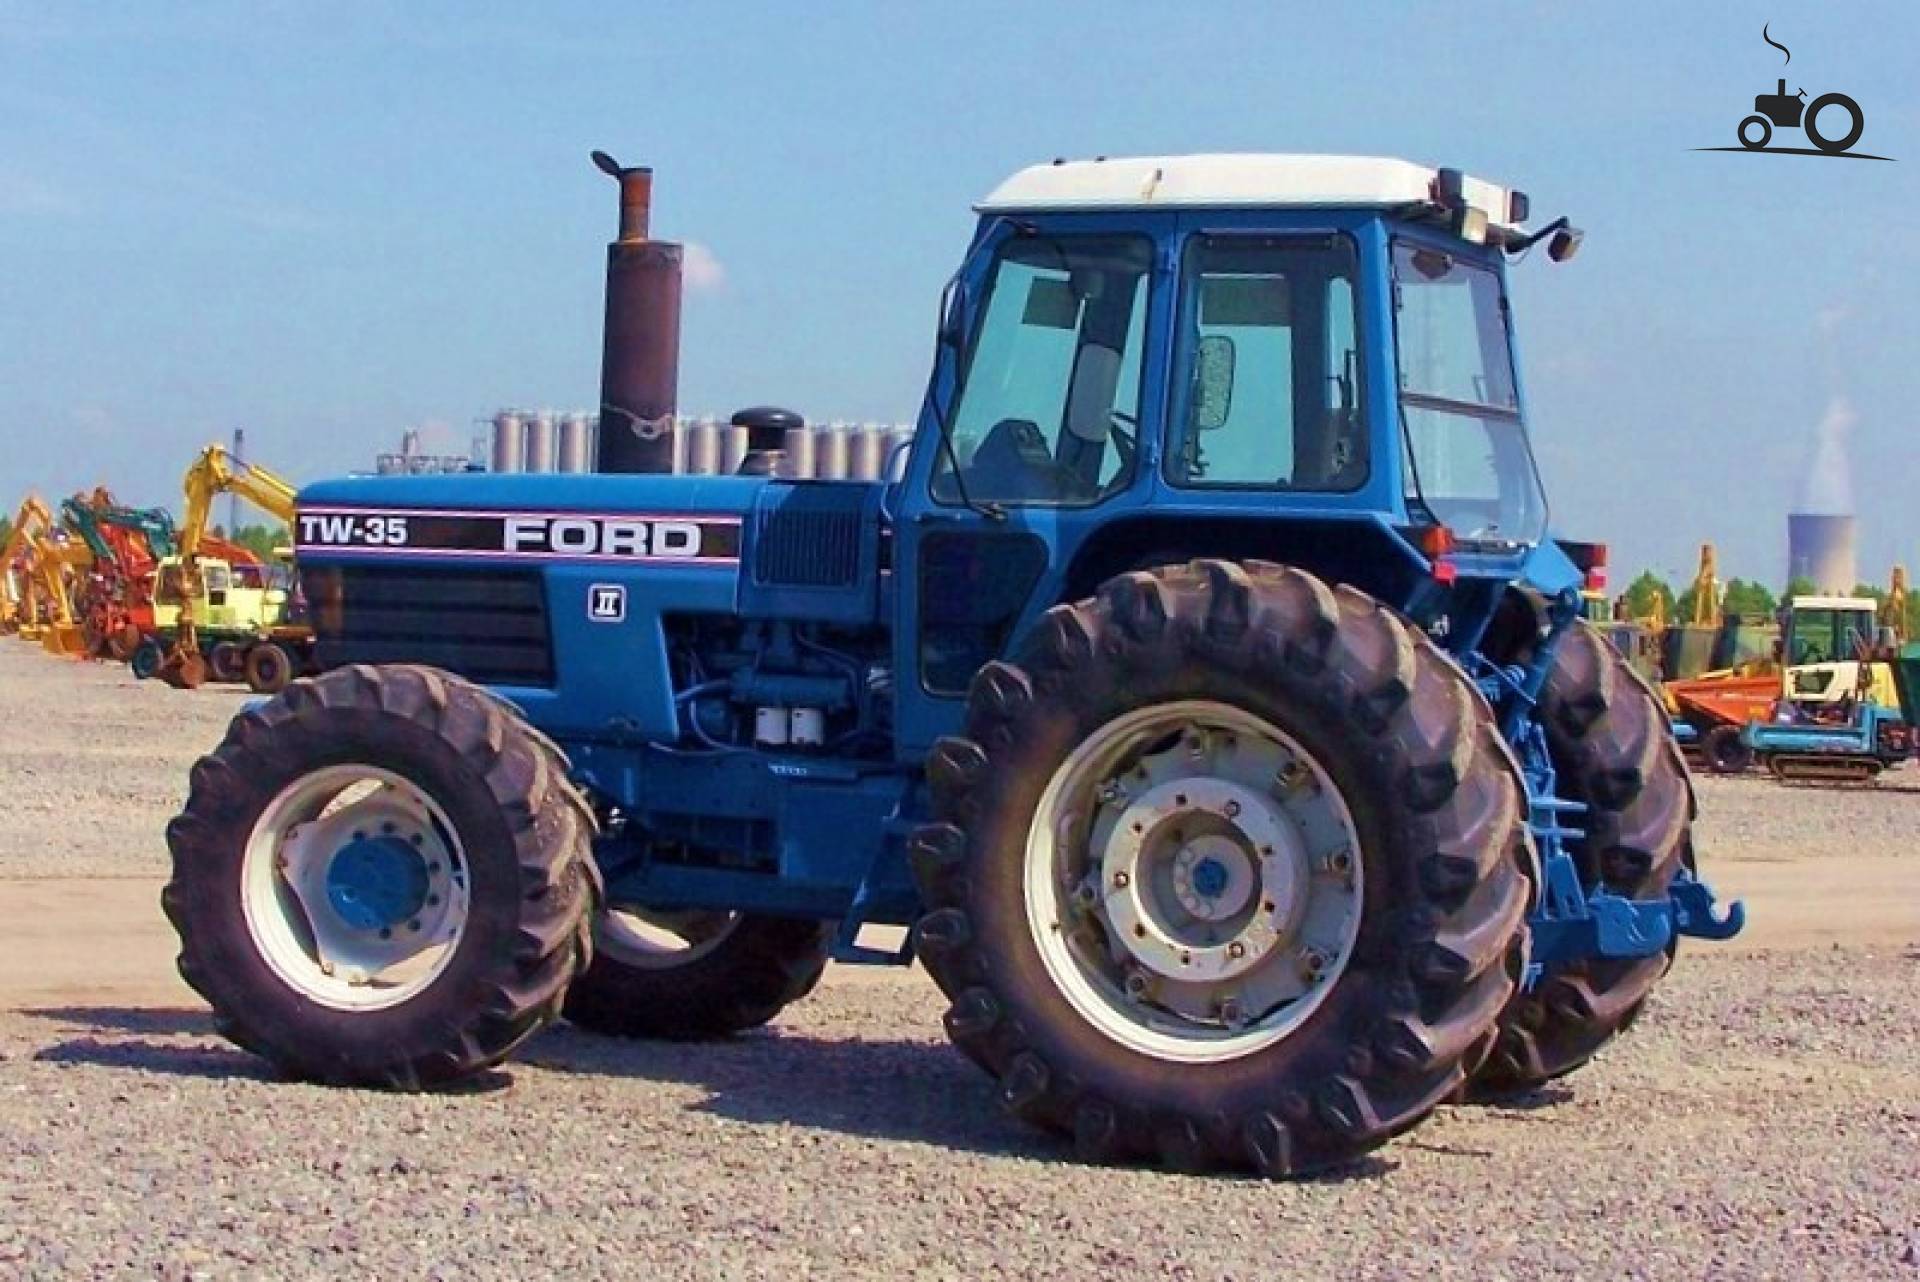 Ford TW 35